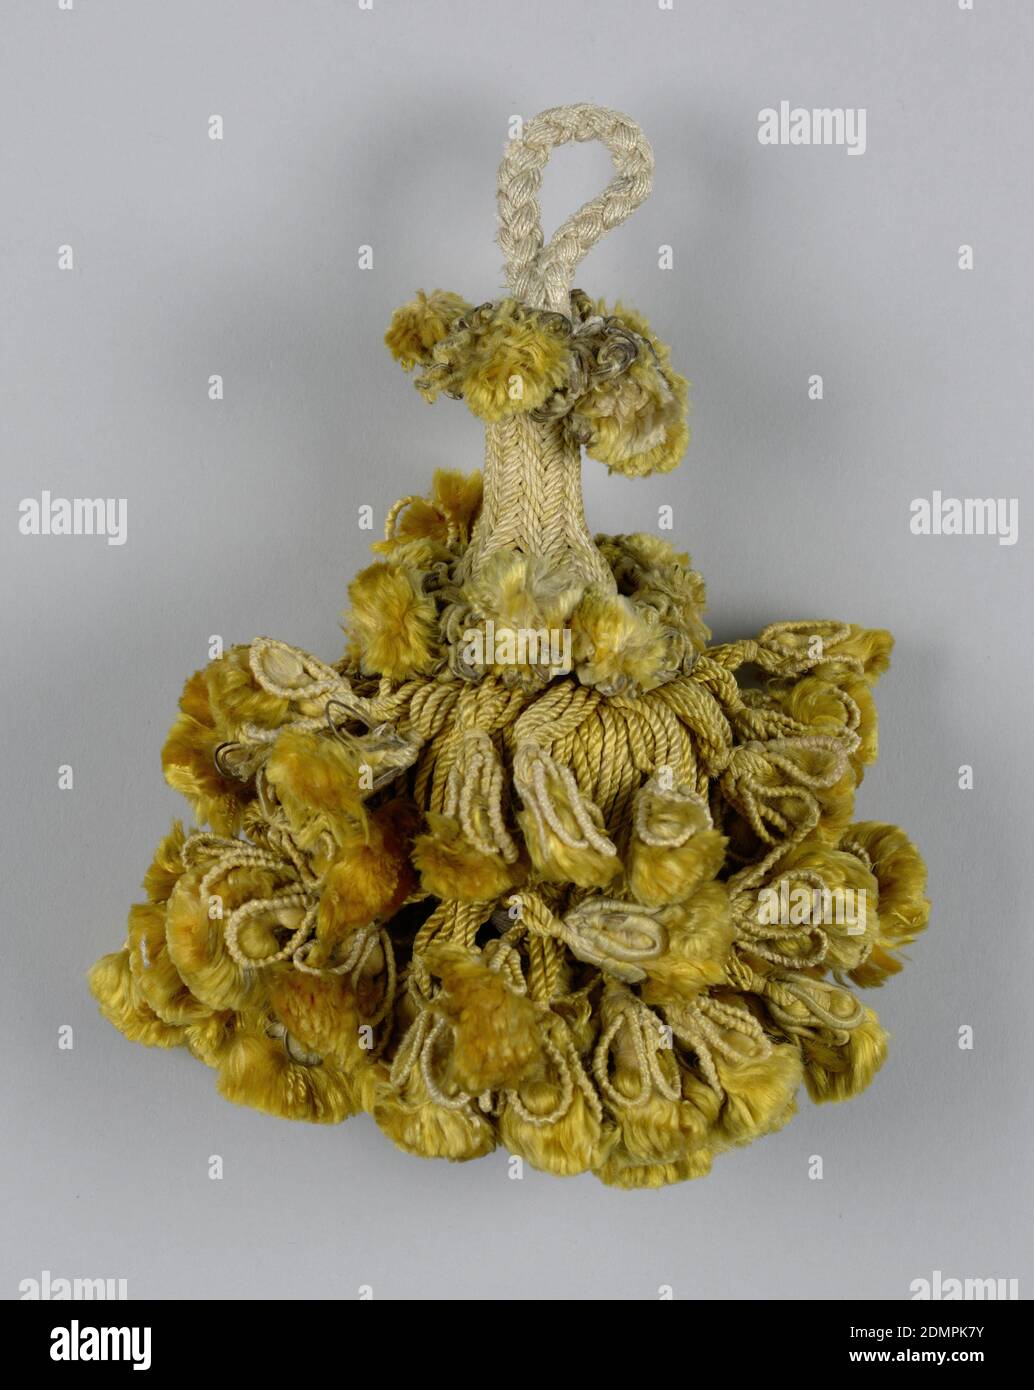 Tassel, Medium: silk, copper wire, linen, wooden core, Skirt of yellow silk threads in two lengths, twisted and looped and holding ornamental tassels. Two collars of similar tassels. Head, cylindrical and broadening toward the base, is wrapped in yellow threads. Loop of white silk threads braided into a cord., Spain, 18th century, trimmings, Tassel Stock Photo